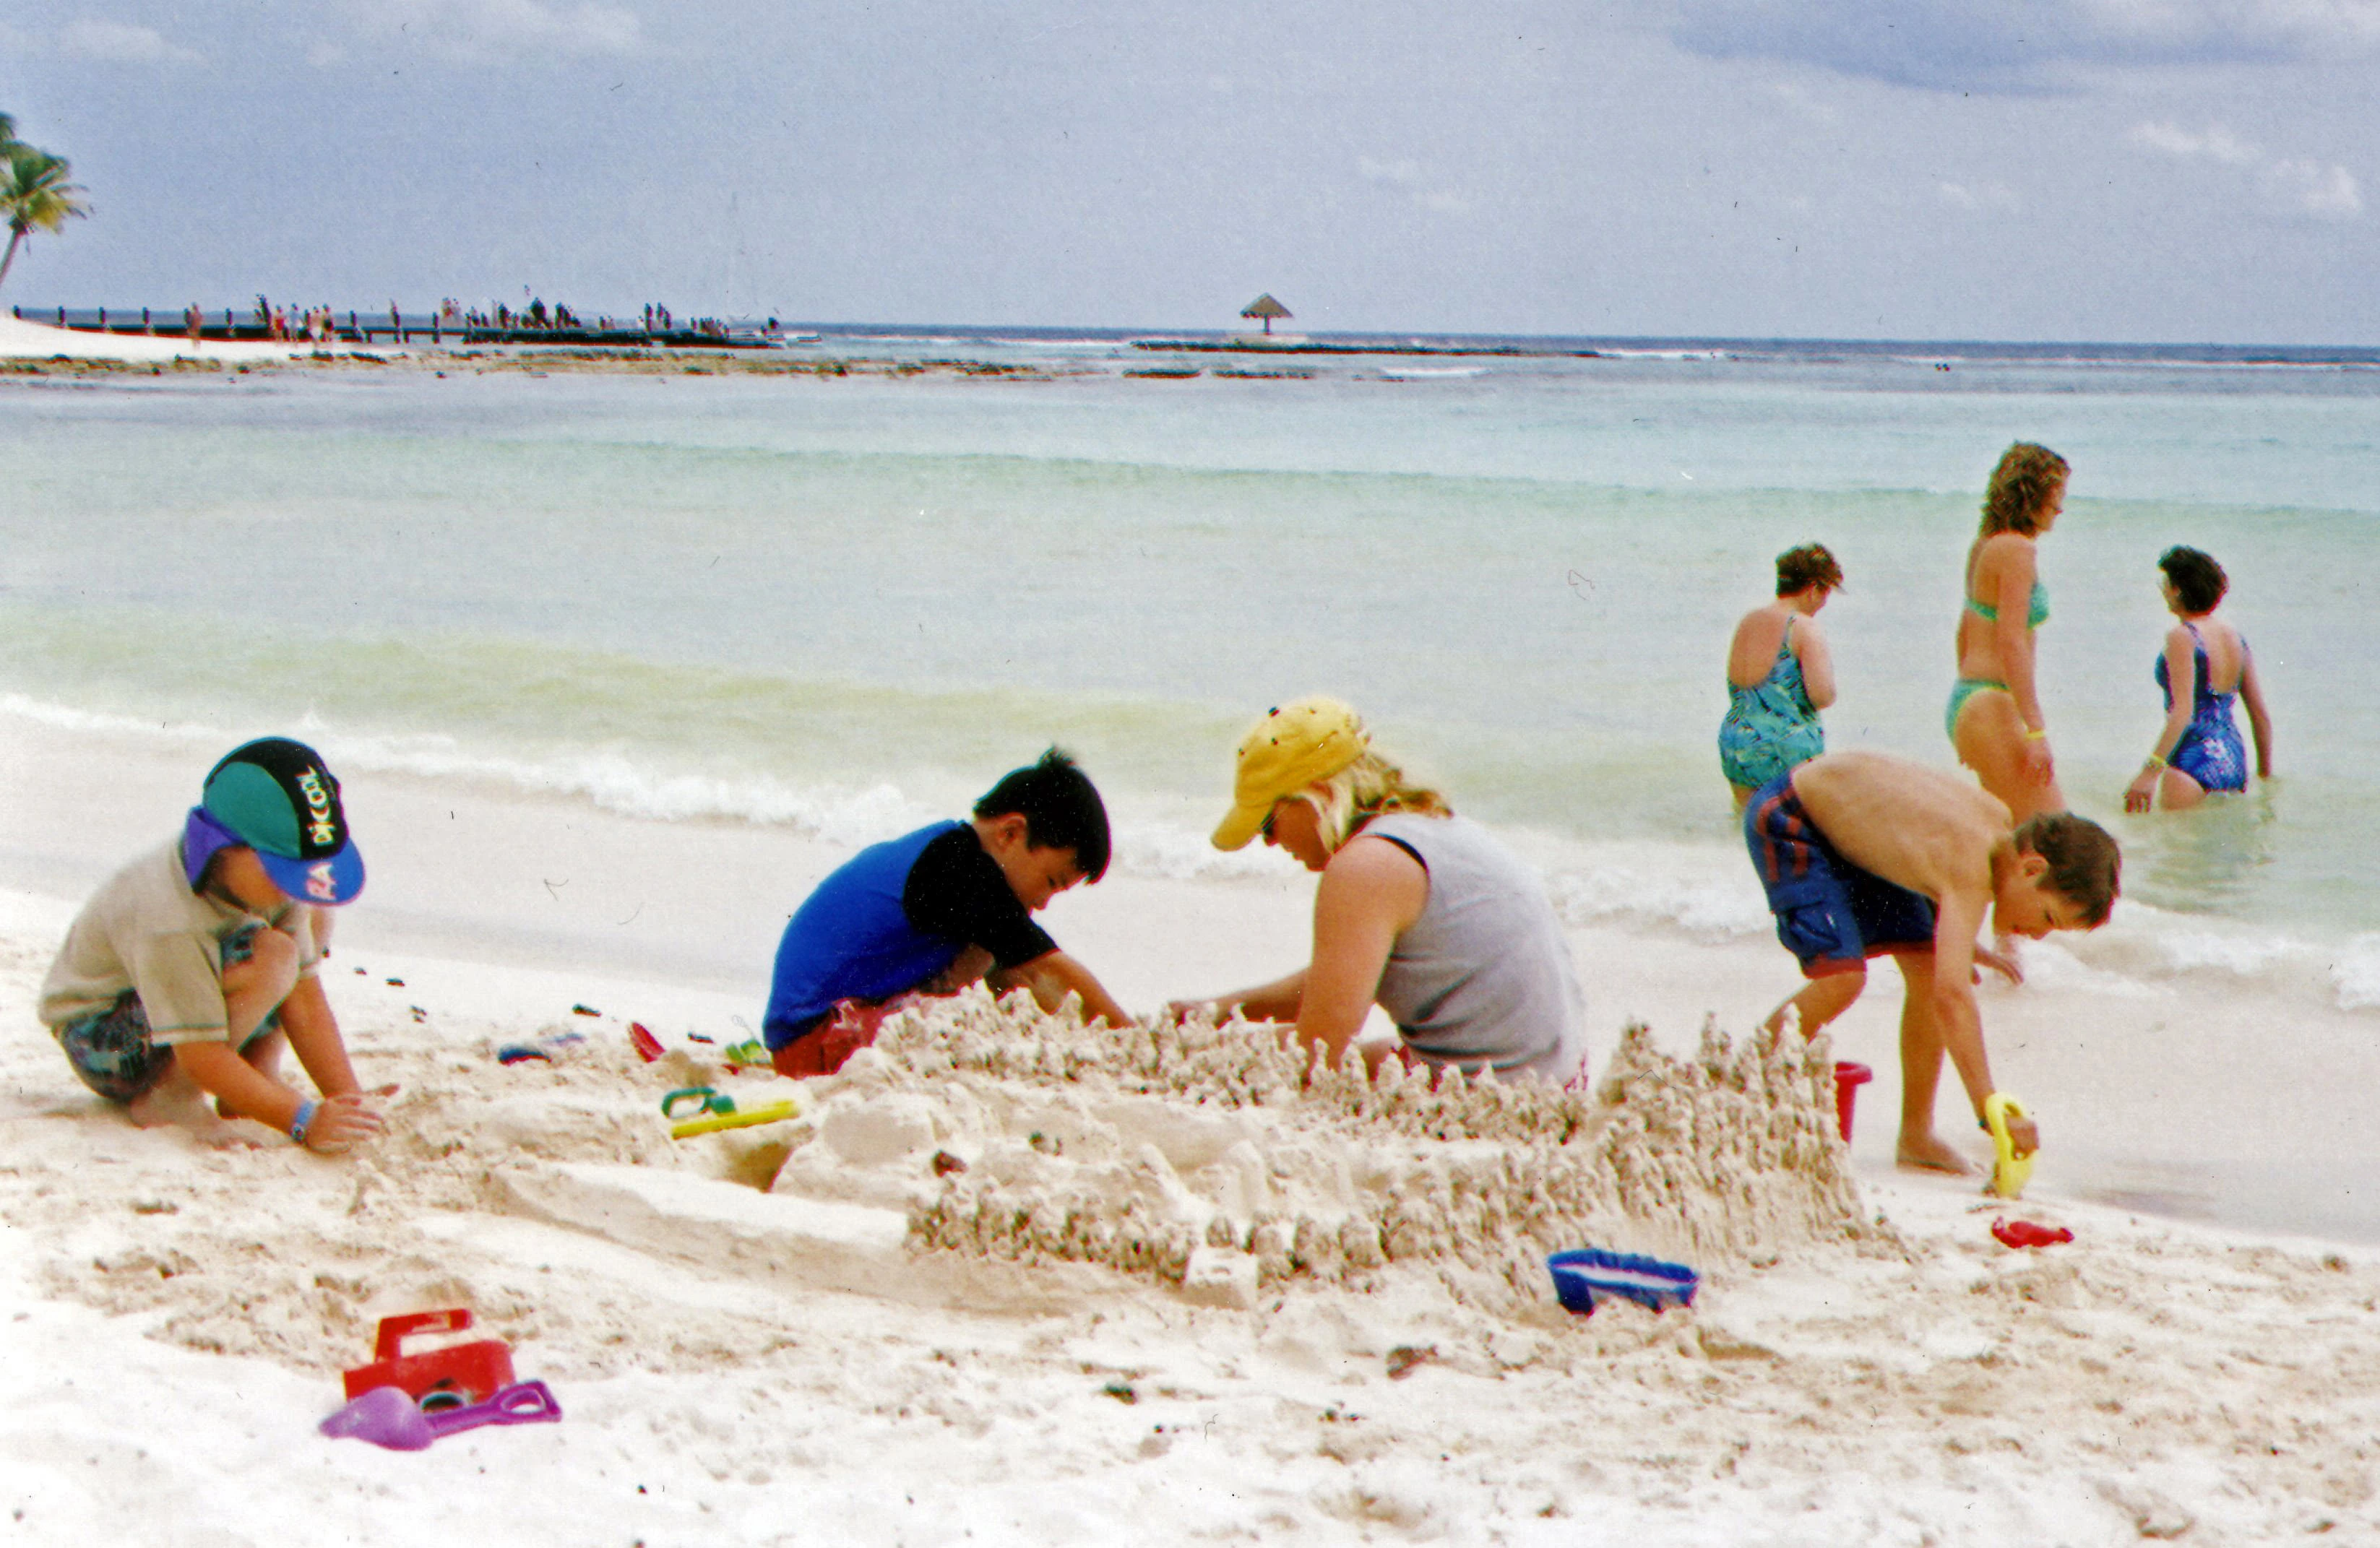 Kids building a sandcastle on the beach with the ocean and a few people in the water in the background